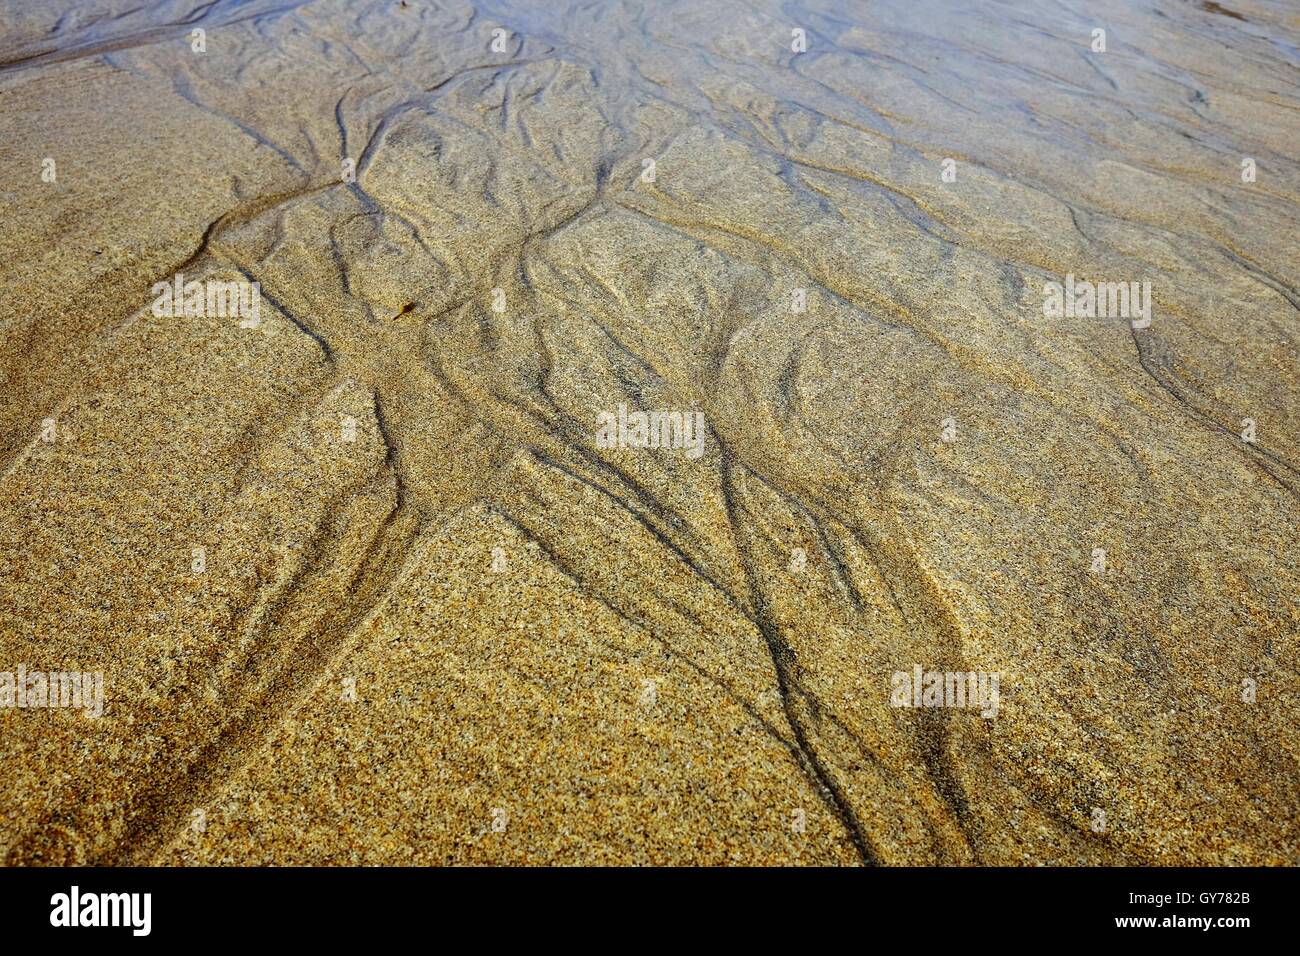 Patterns from the tide in sand on beach. Stock Photo